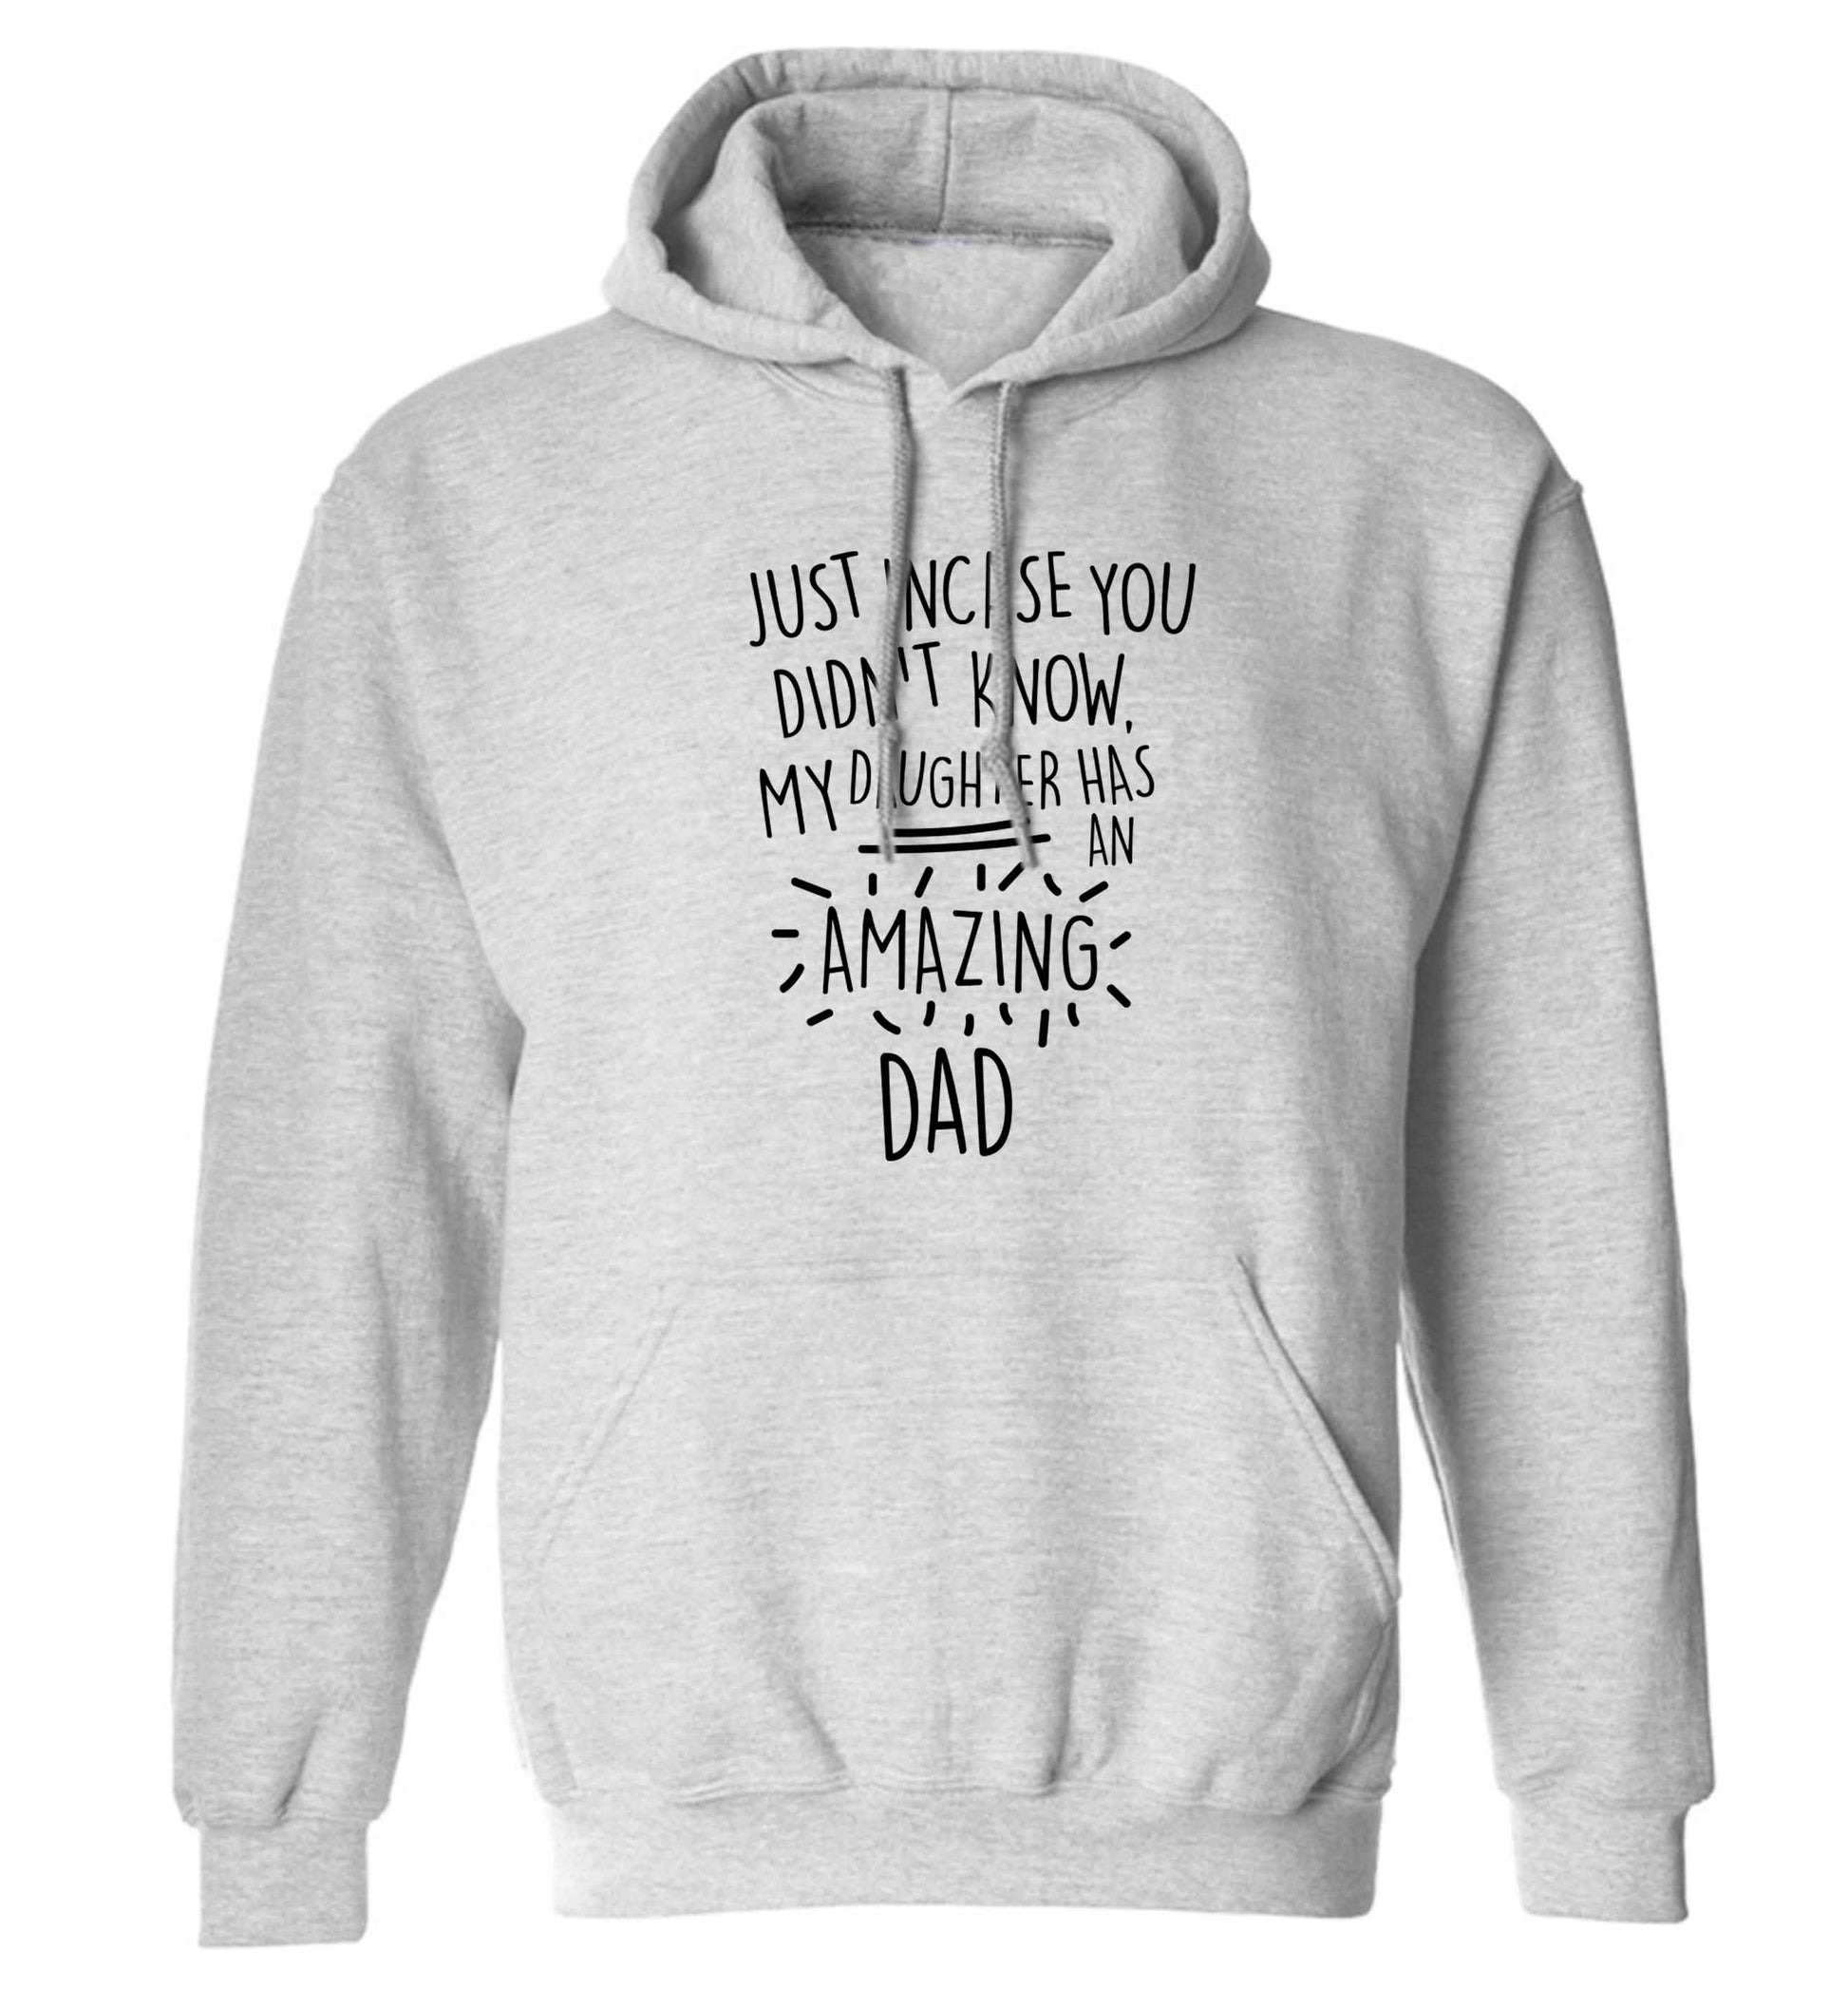 Just incase you didn't know my daughter has an amazing dad adults unisex grey hoodie 2XL